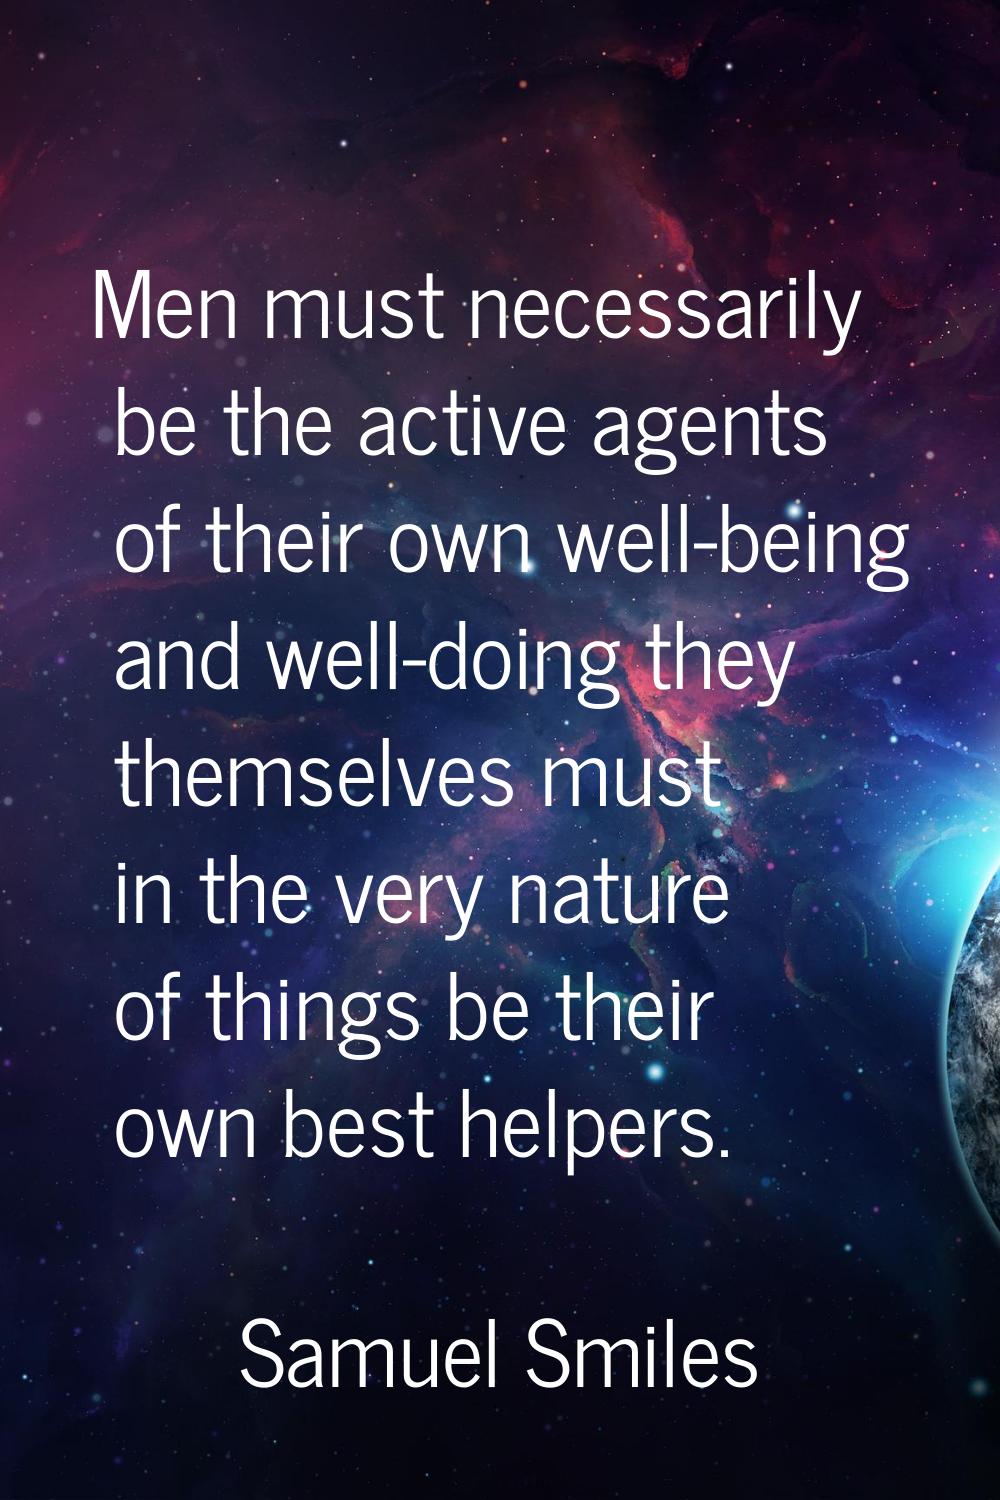 Men must necessarily be the active agents of their own well-being and well-doing they themselves mu